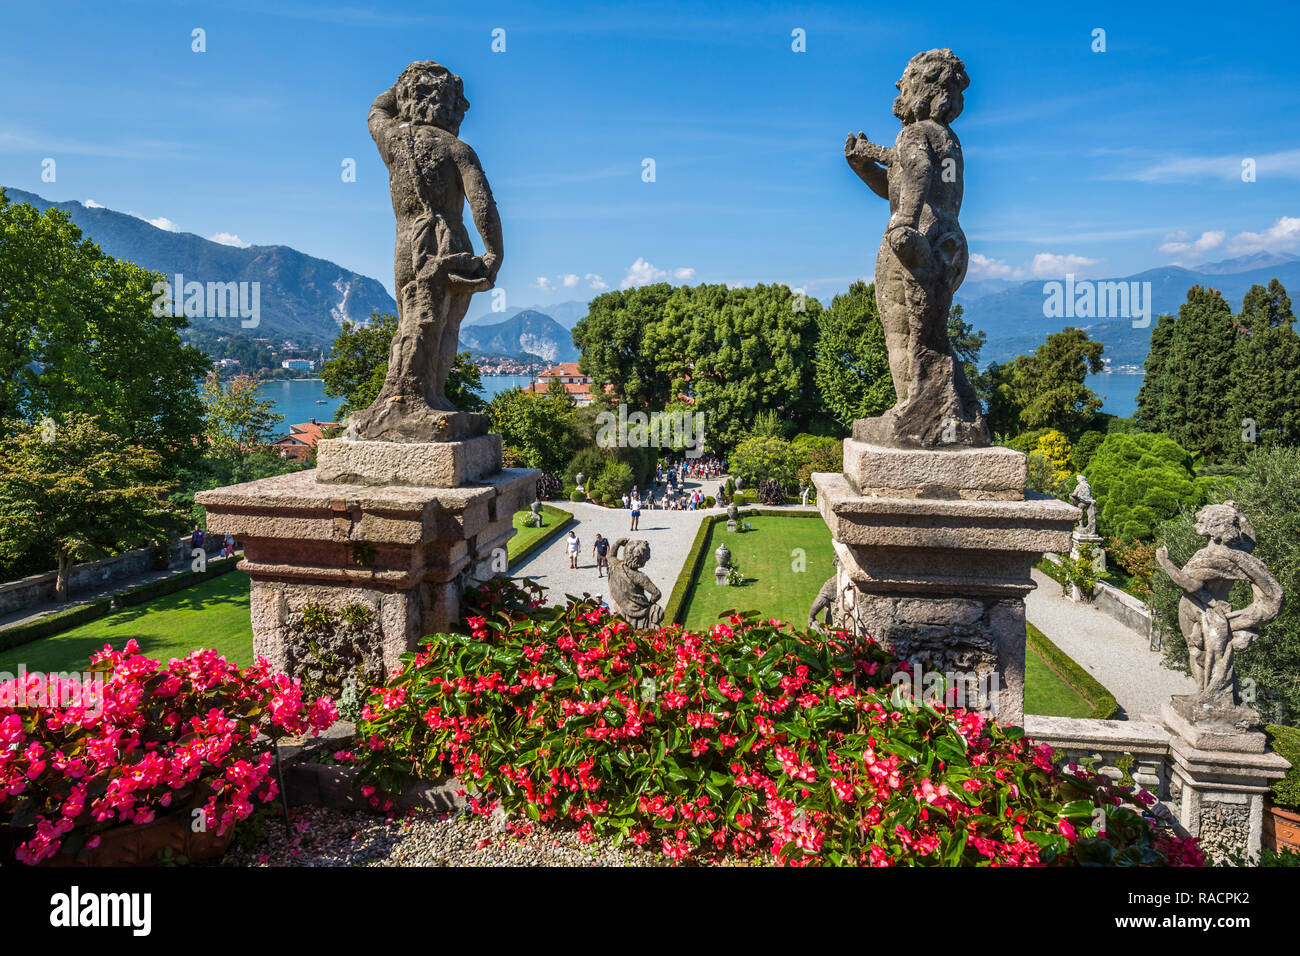 View from Floral Fountains, Isola Bella, Borromean Islands, Lake Maggiore, Piedmont, Italian Lakes, Italy, Europe Stock Photo